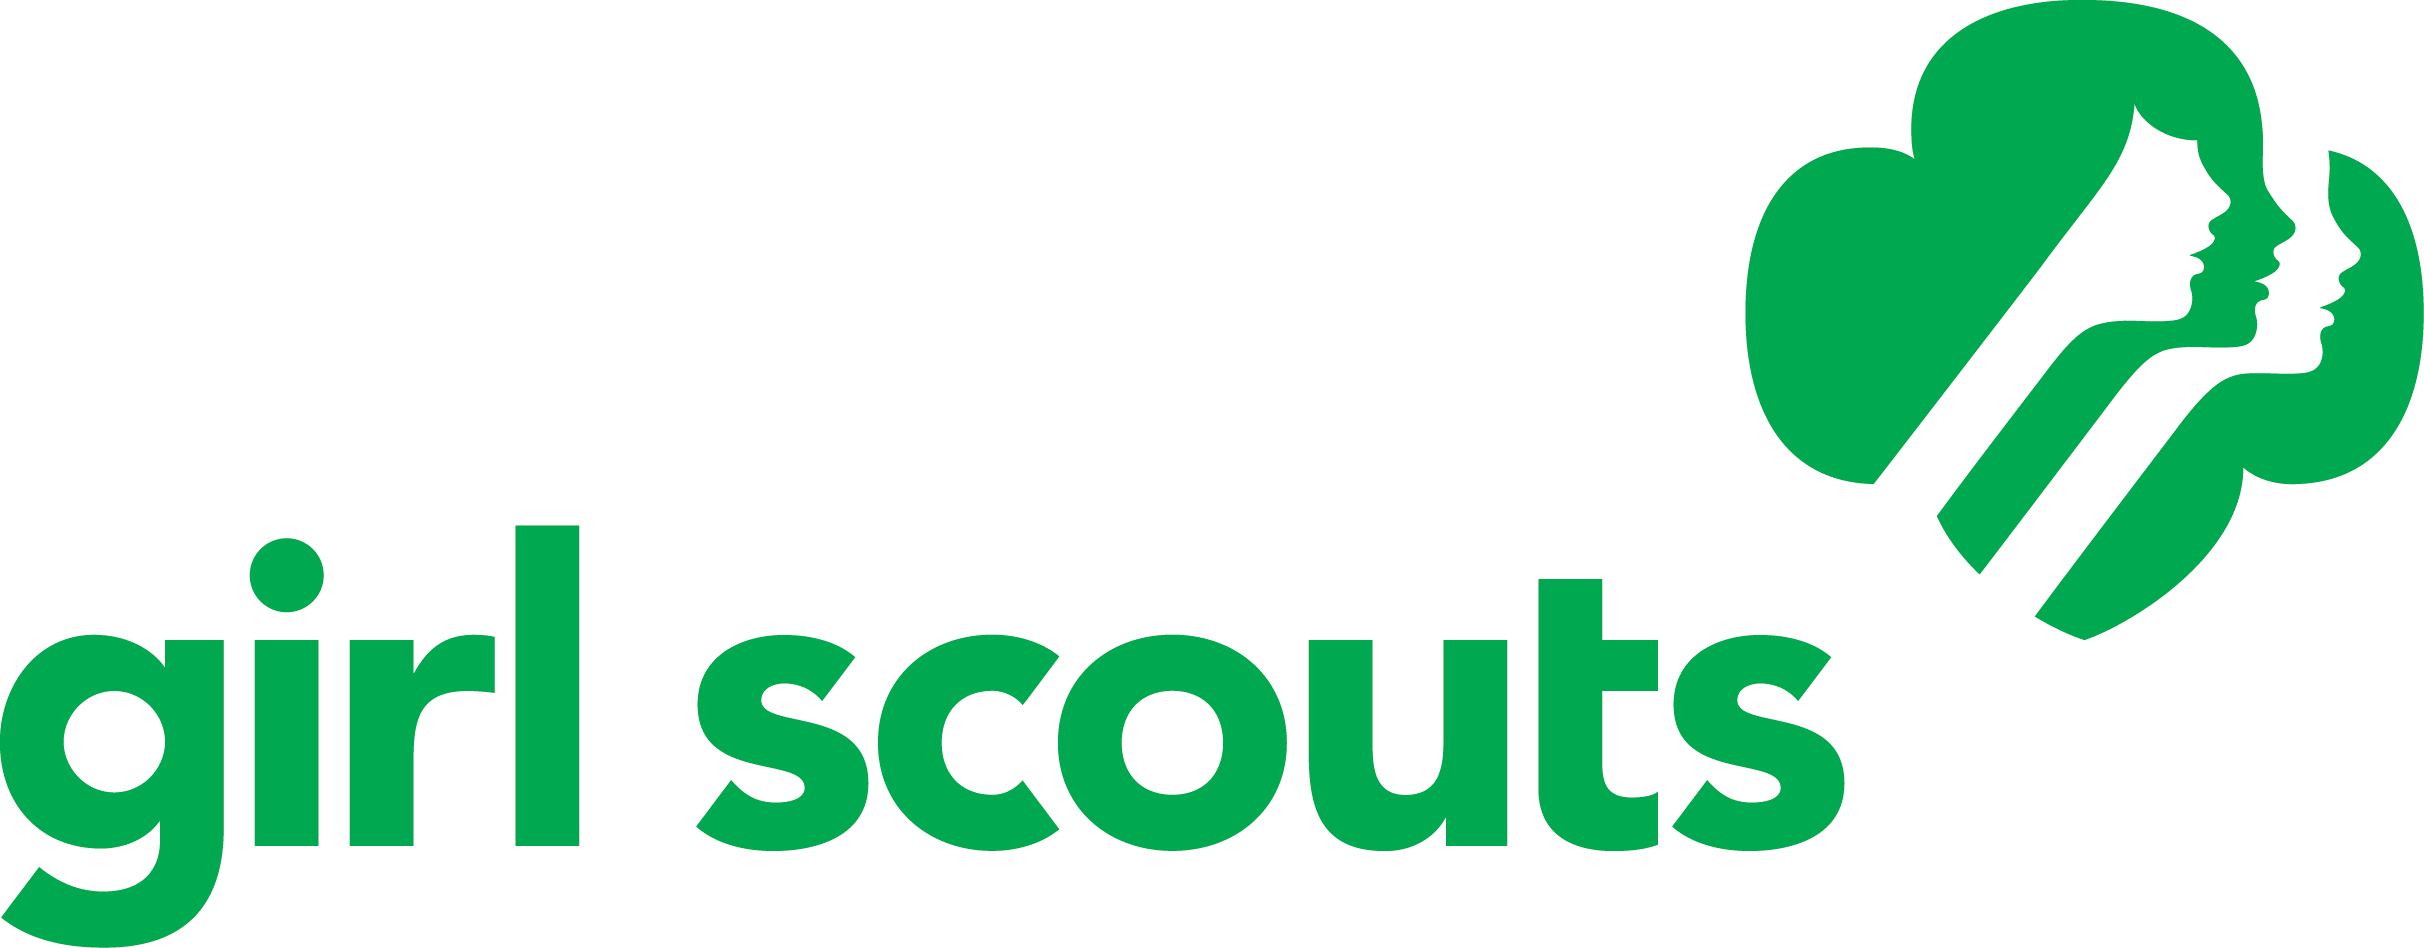 free girl scout clip art images - photo #20